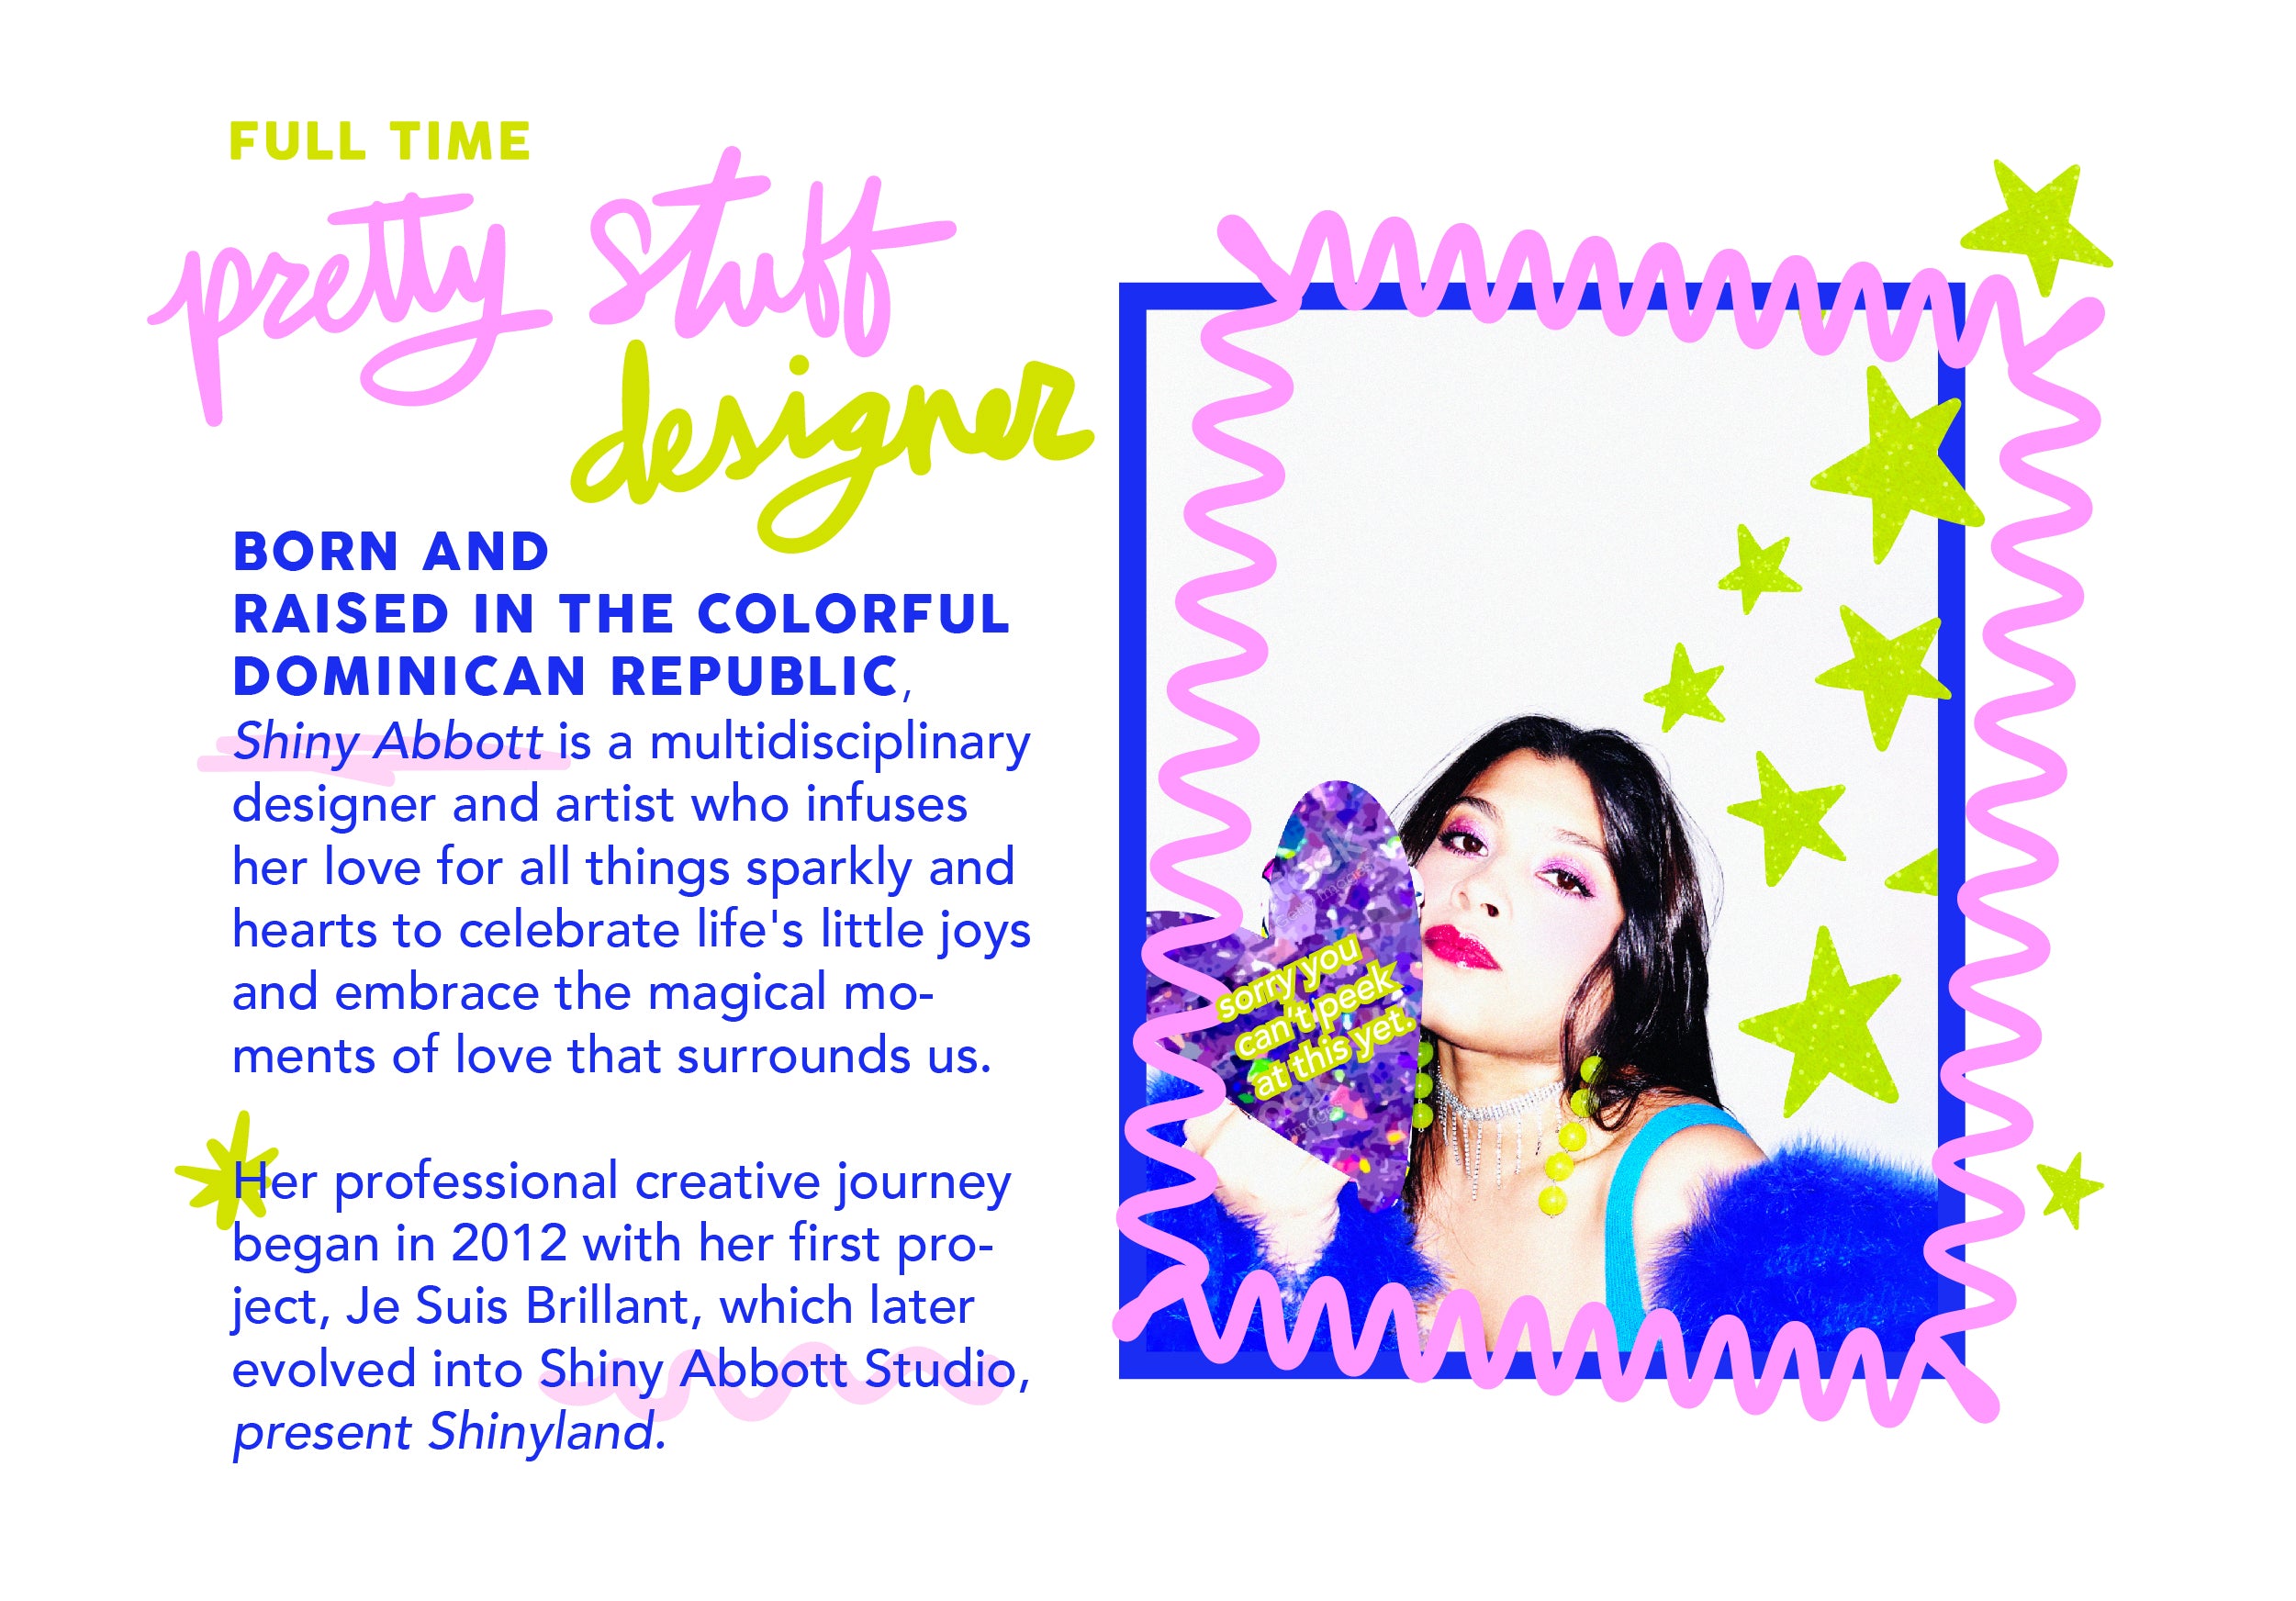 Born and  raised in the colorful Dominican Republic, Shiny Abbott is a multidisciplinary designer and artist